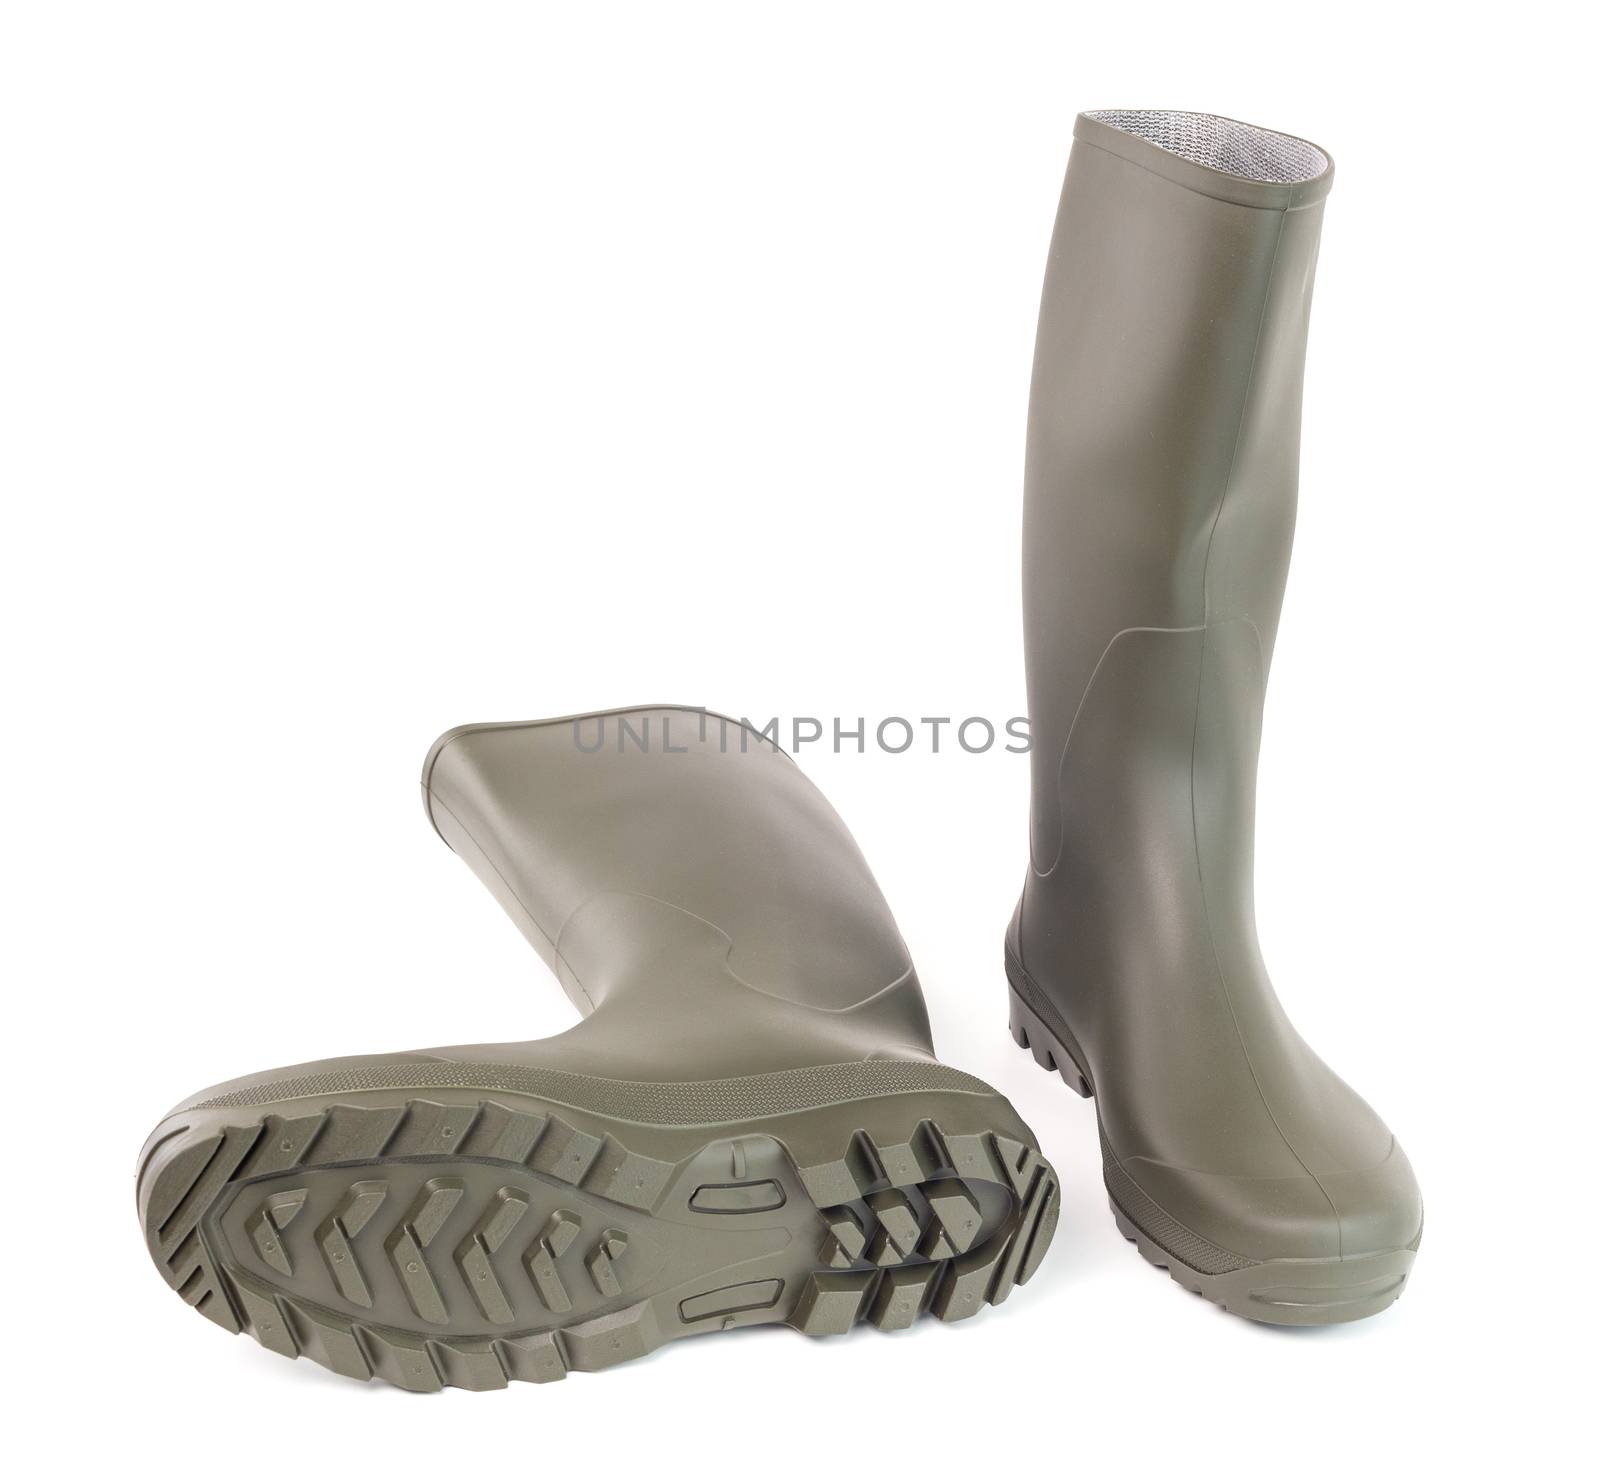 Pair of green clean rubber boots isolated on white background. Front view.